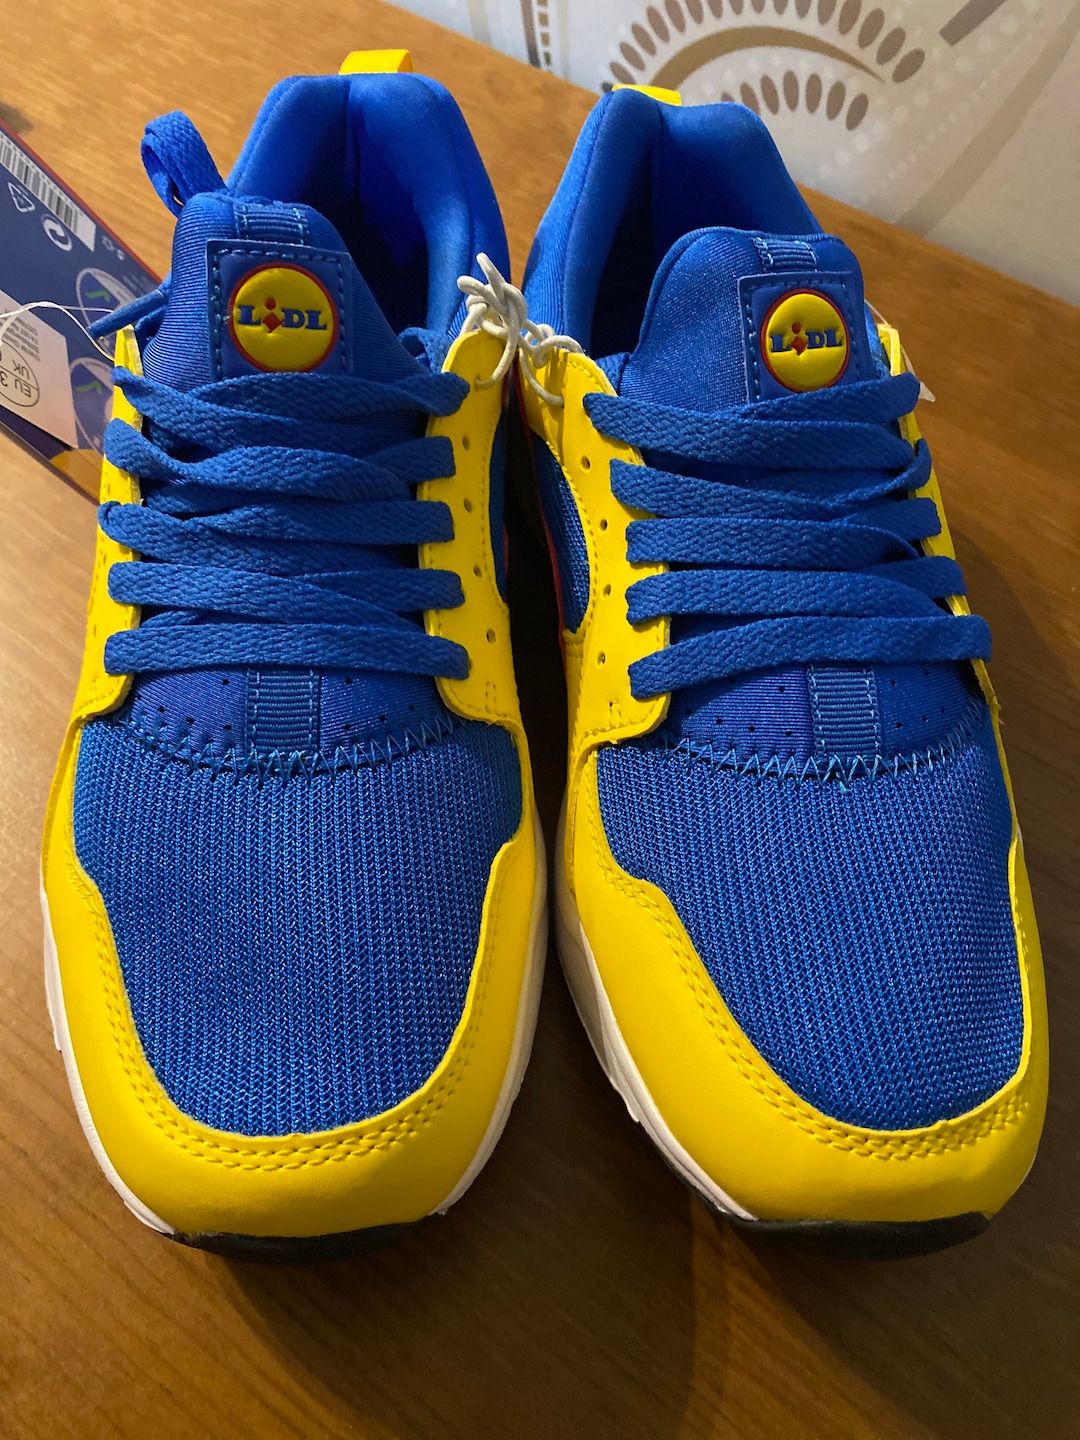 Lidl sports shoes for men and women - Lithuania, New - The wholesale  platform